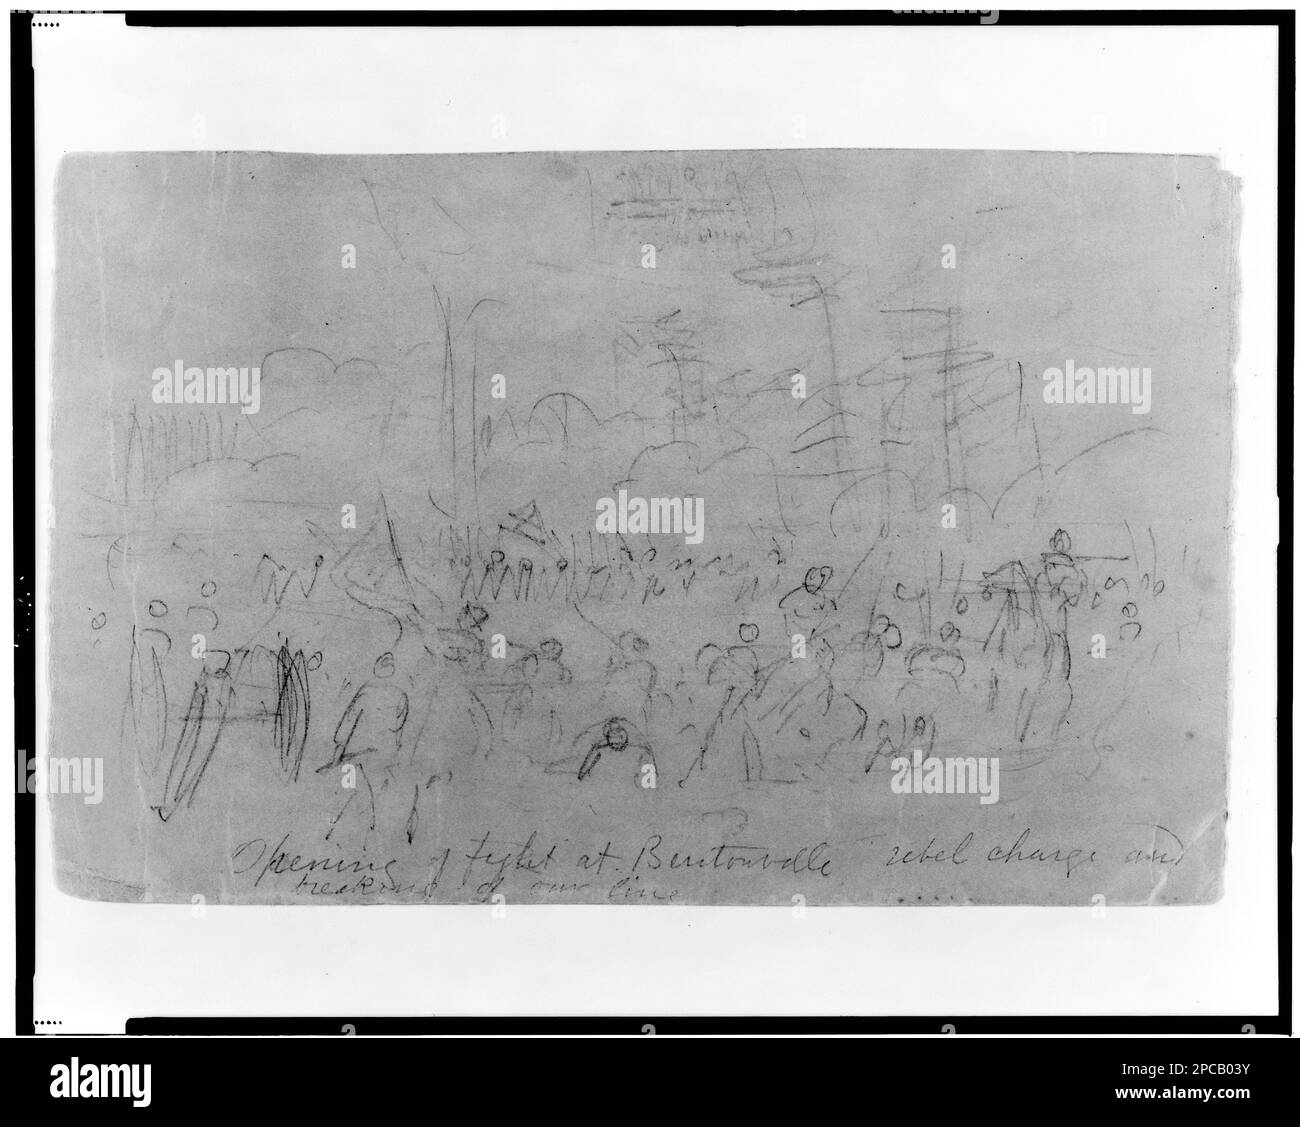 Opening of fight at Bentonville rebel charge and breaking of our line. Morgan collection of Civil War drawings. Bentonville, Battle of, Bentonville, N.C, 1865, Soldiers, Union, 1860-1870, United States, History, Civil War, 1861-1865, Campaigns & battles, United States, North Carolina, Bentonville Stock Photo